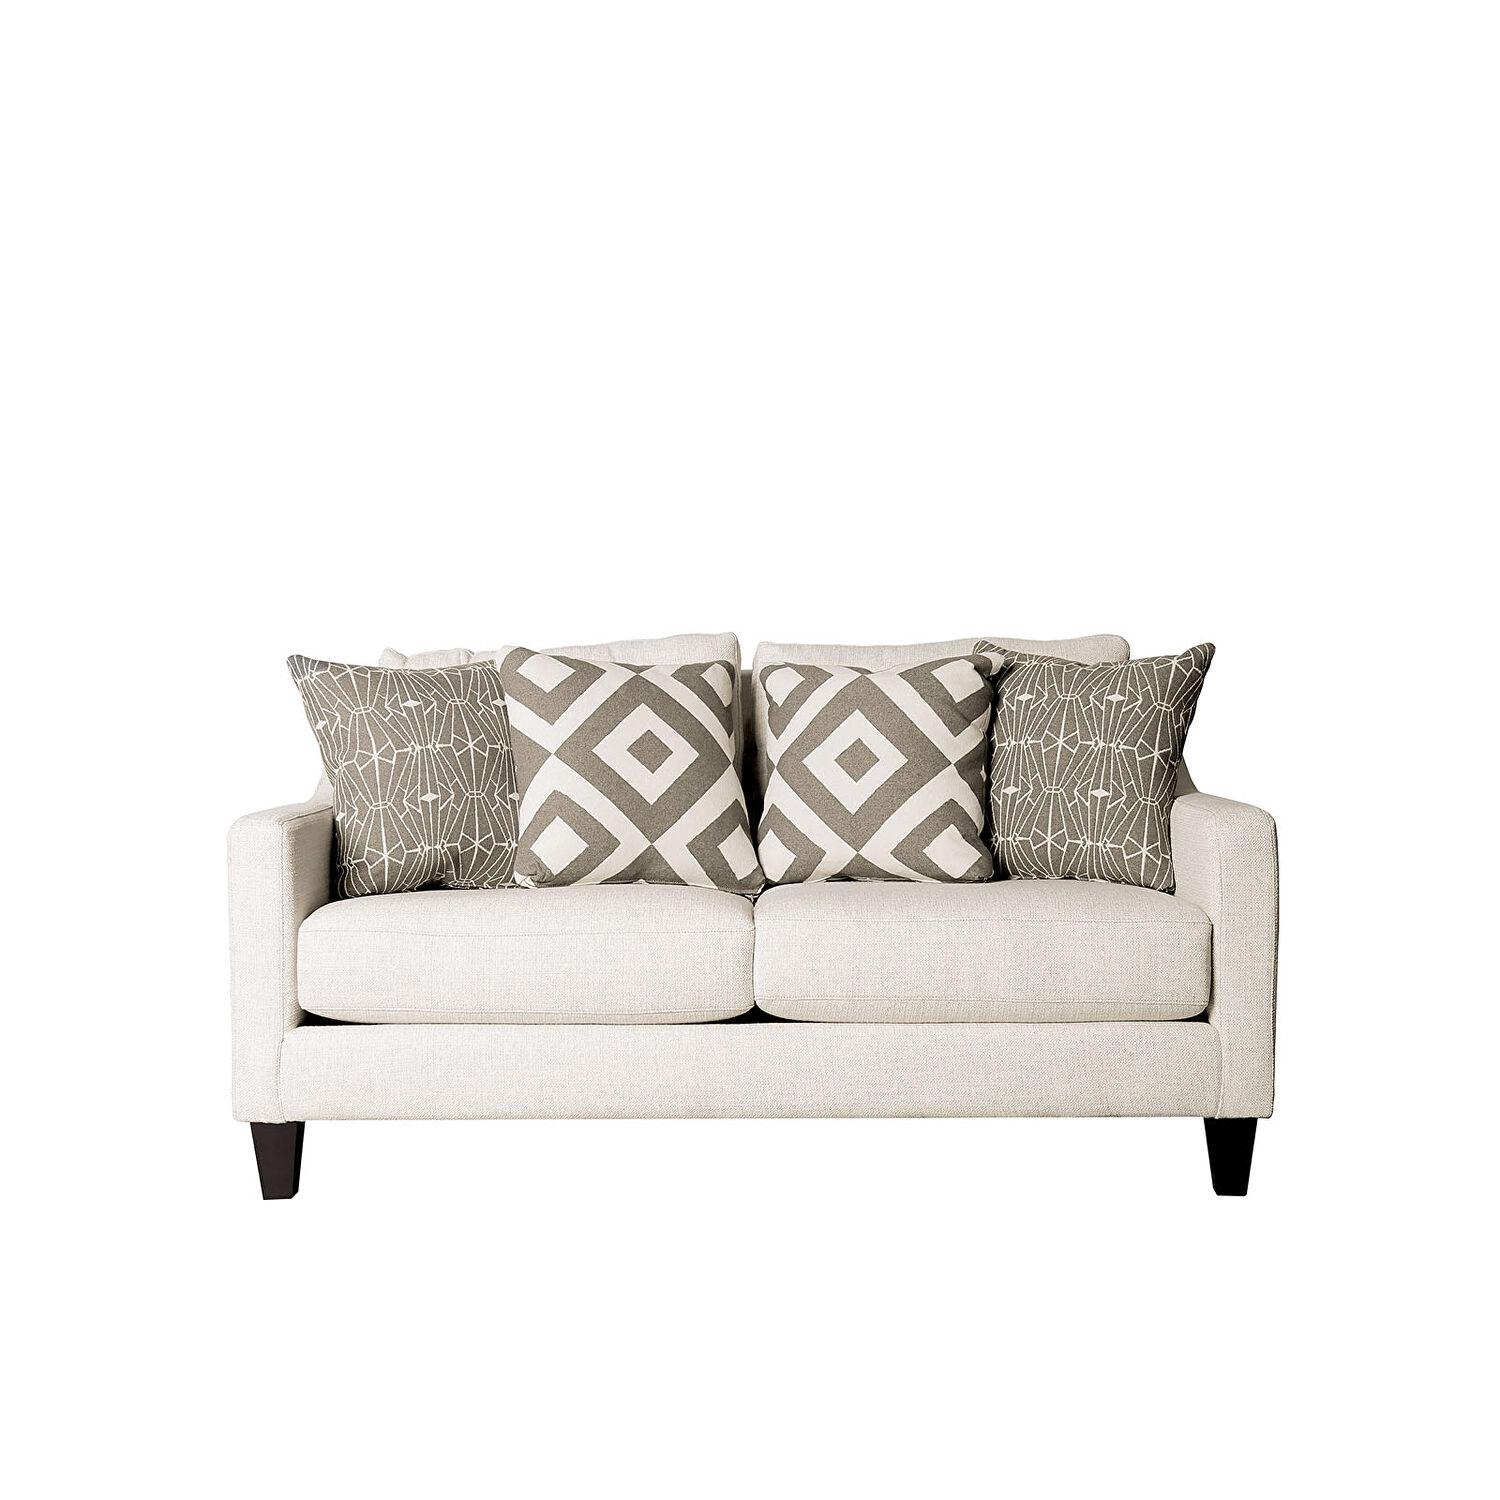 Transitional Loveseat PARKER SM8563-LV SM8563-LV in Ivory Fabric